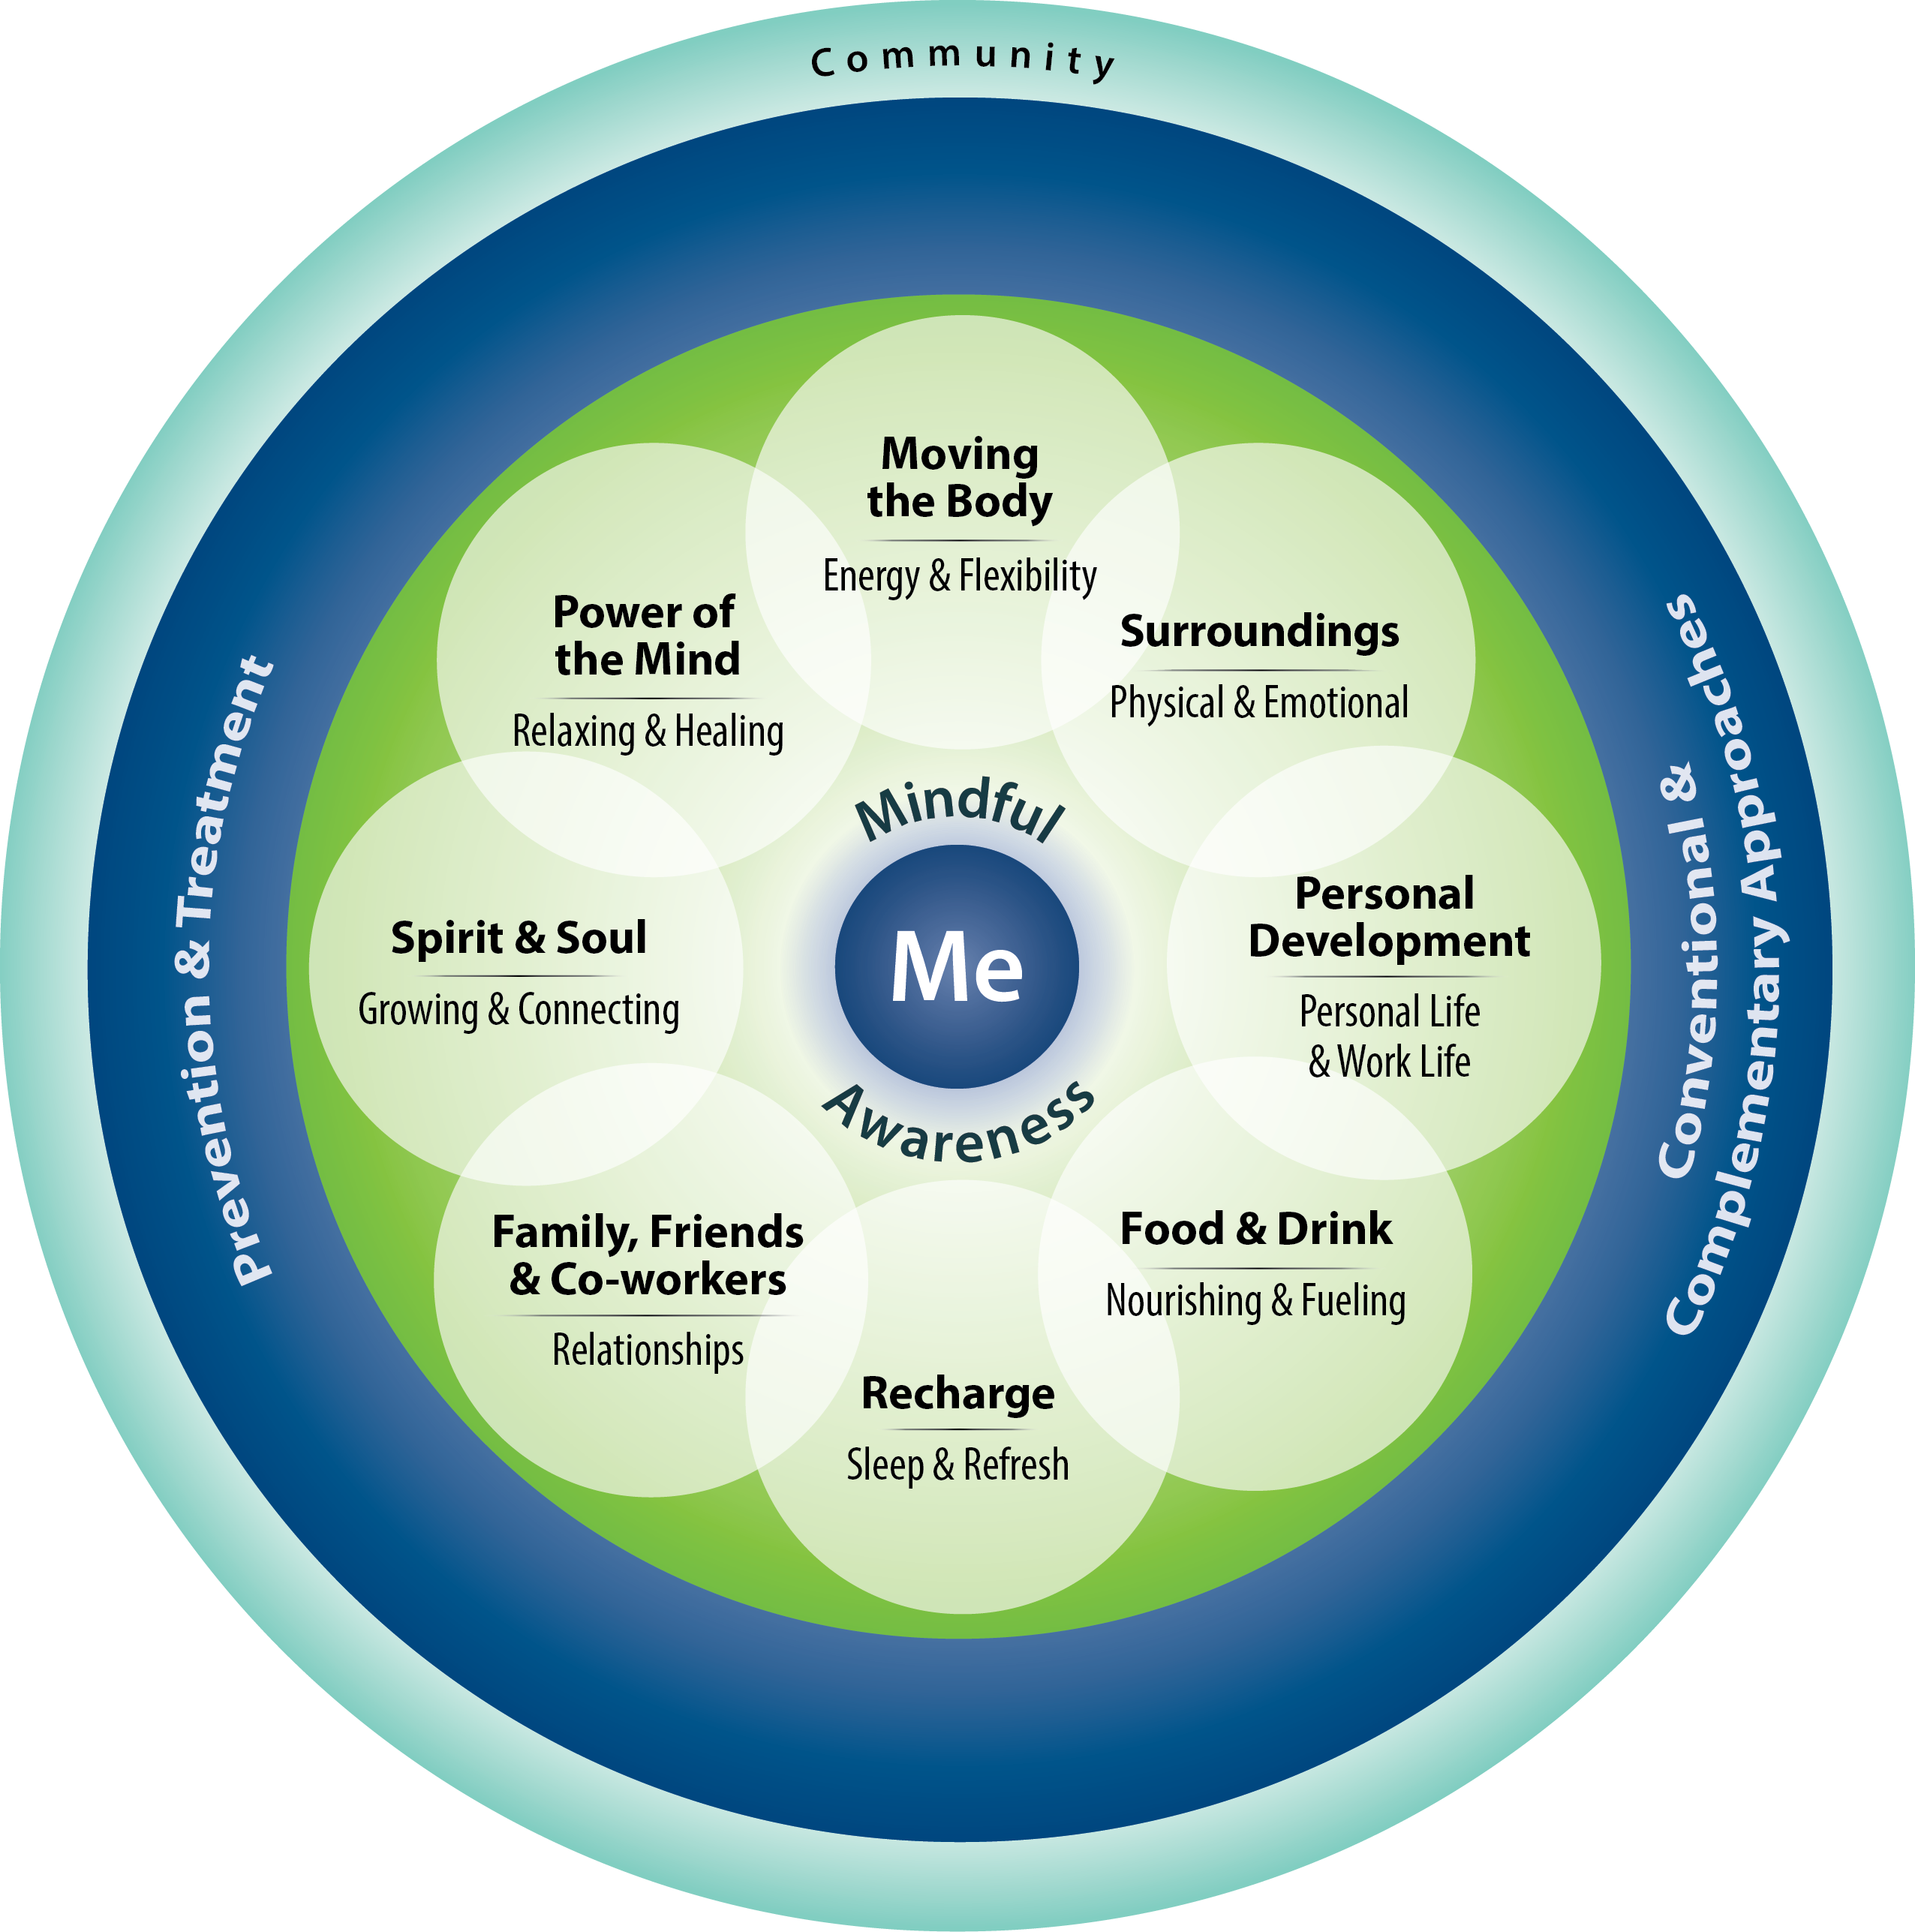 Components of Proactive Health and Well-Being Model: The “Circle of Health” Large light blue circle that says “community”. Inside that circle is a dark blue circle that says “Prevention & Treatment” on the right and “Conventional & Complementary Approaches” on the left Inside of that is a bright green circle. Overlaid on the bright green circle are smaller white circles. Clockwise from the top they say “Working Your Body; Energy & Flexibility,” “Surroundings; Physical &Emotional,” “Personal Development; Personal Life & Work Life,” “Food & Drink; Nourishing & Fueling,” “Recharge; Sleep & Refresh,” “Family, Friends & Coworkers; Listening & Being Heard,” “Spirit & Soul; Growing & Connecting,” and “Power of the Mind; Relaxing & Healing.” At the center of this graphic is a small blue circle that says “Me.” Above the circle it says “Mindful” and below the circle it says “Awareness”.